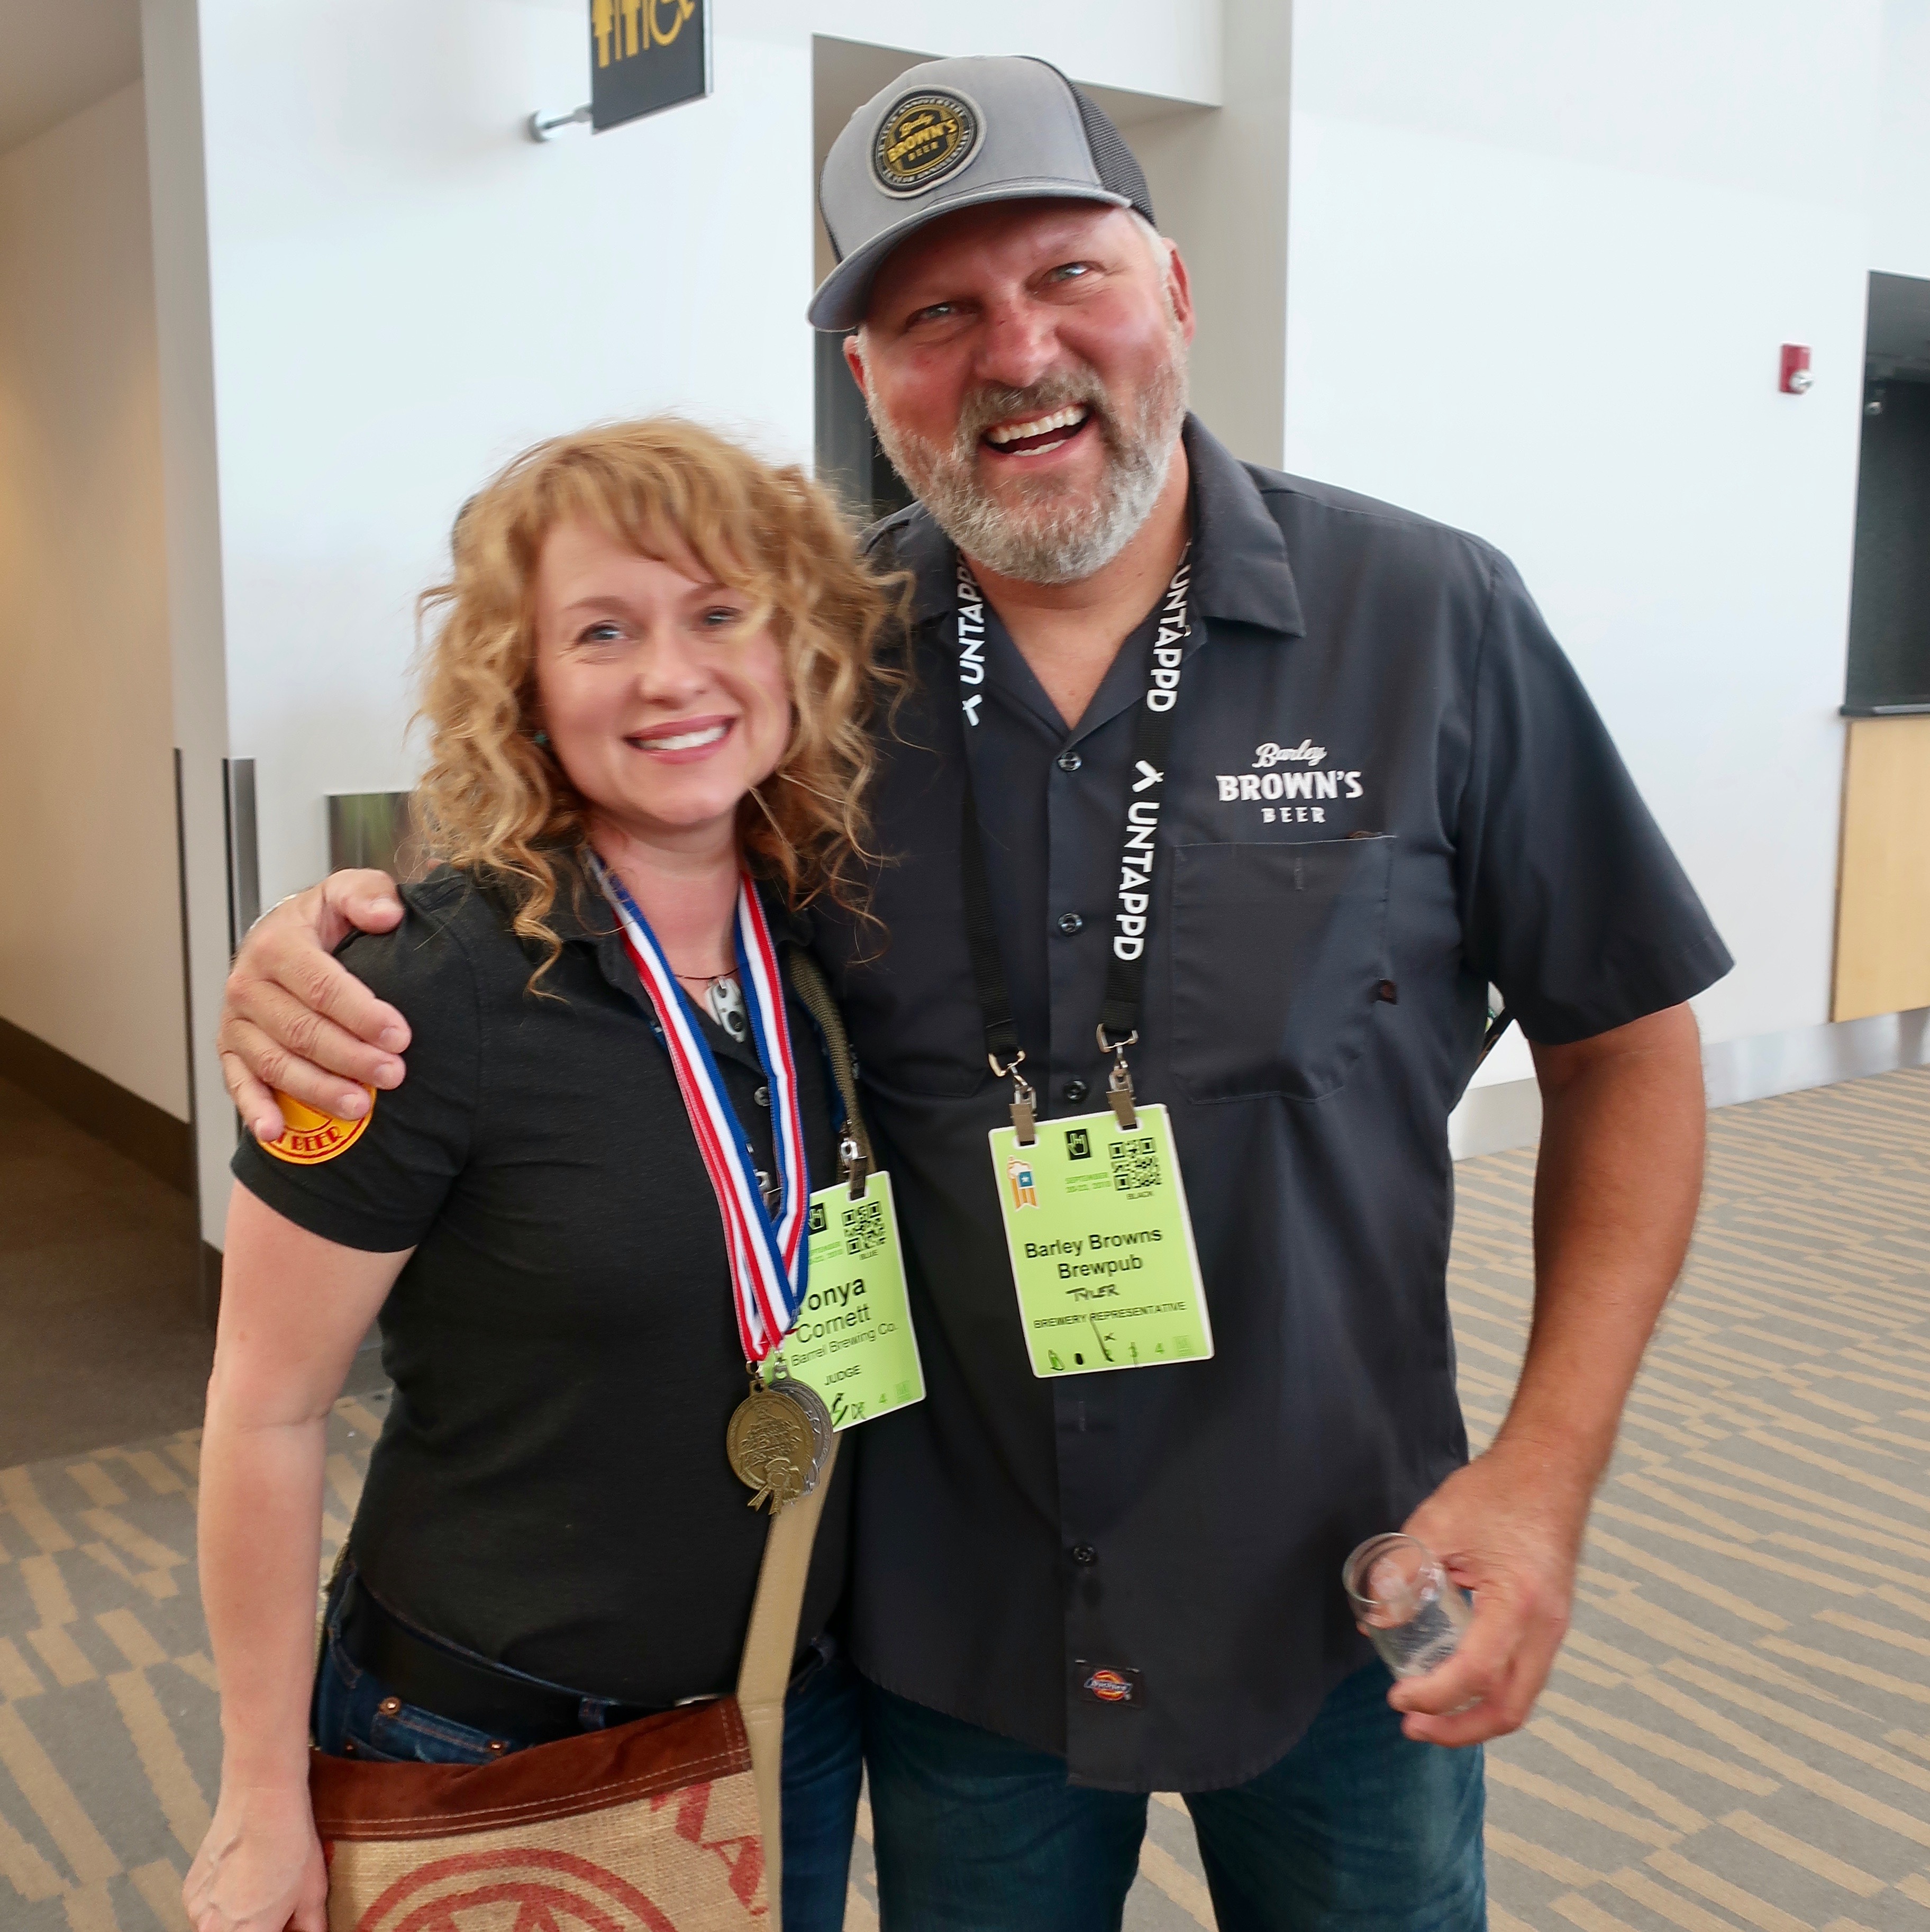 Tonya Cornett of 10 Barrel Brewing and Tyler Brown of Barley Brown's after the GABF Award Cermony at the 2018 Great American Beer Festival.